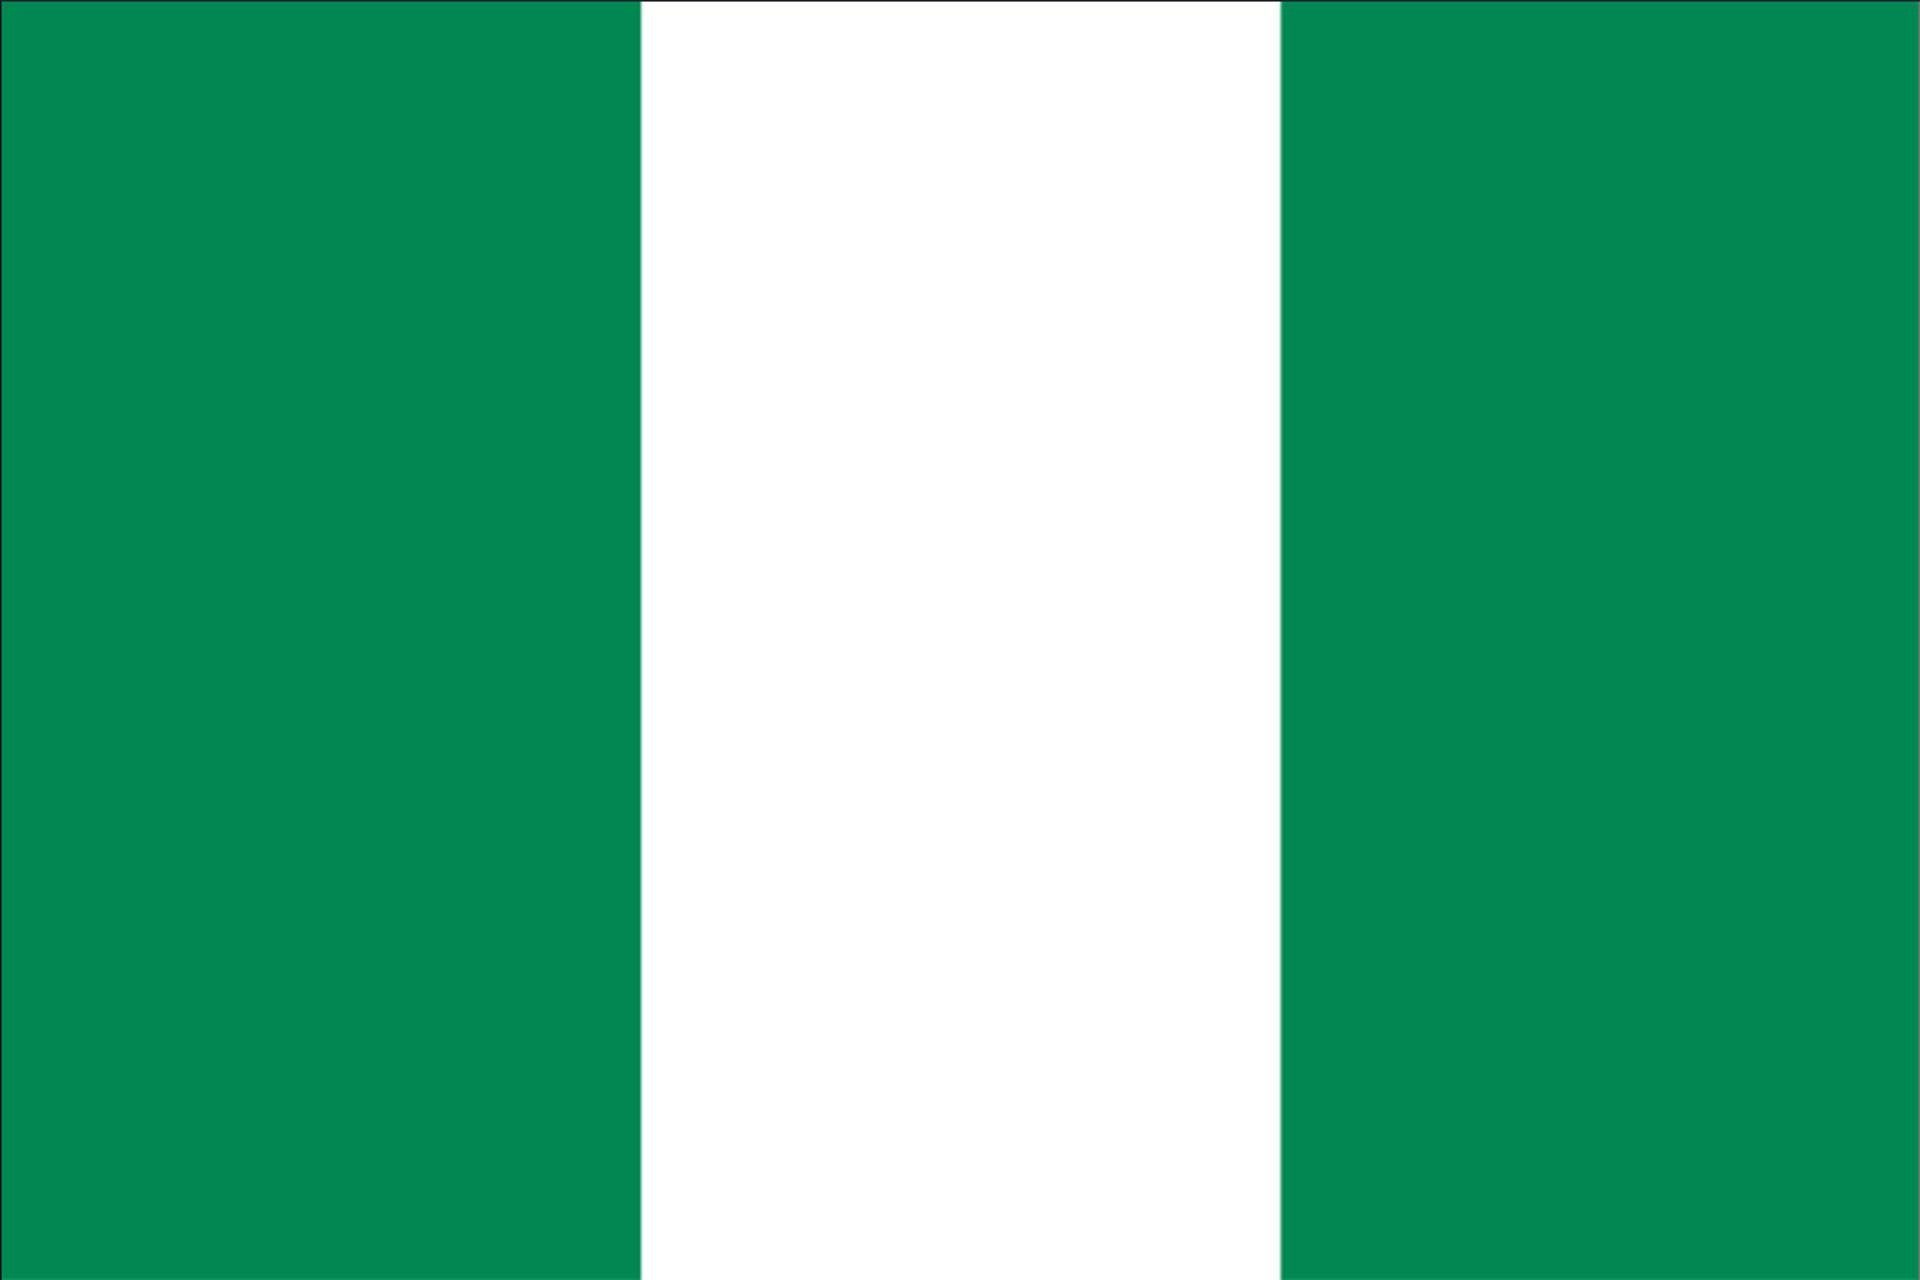 Querformat flaggenmeer Flagge g/m² Flagge Nigeria 110